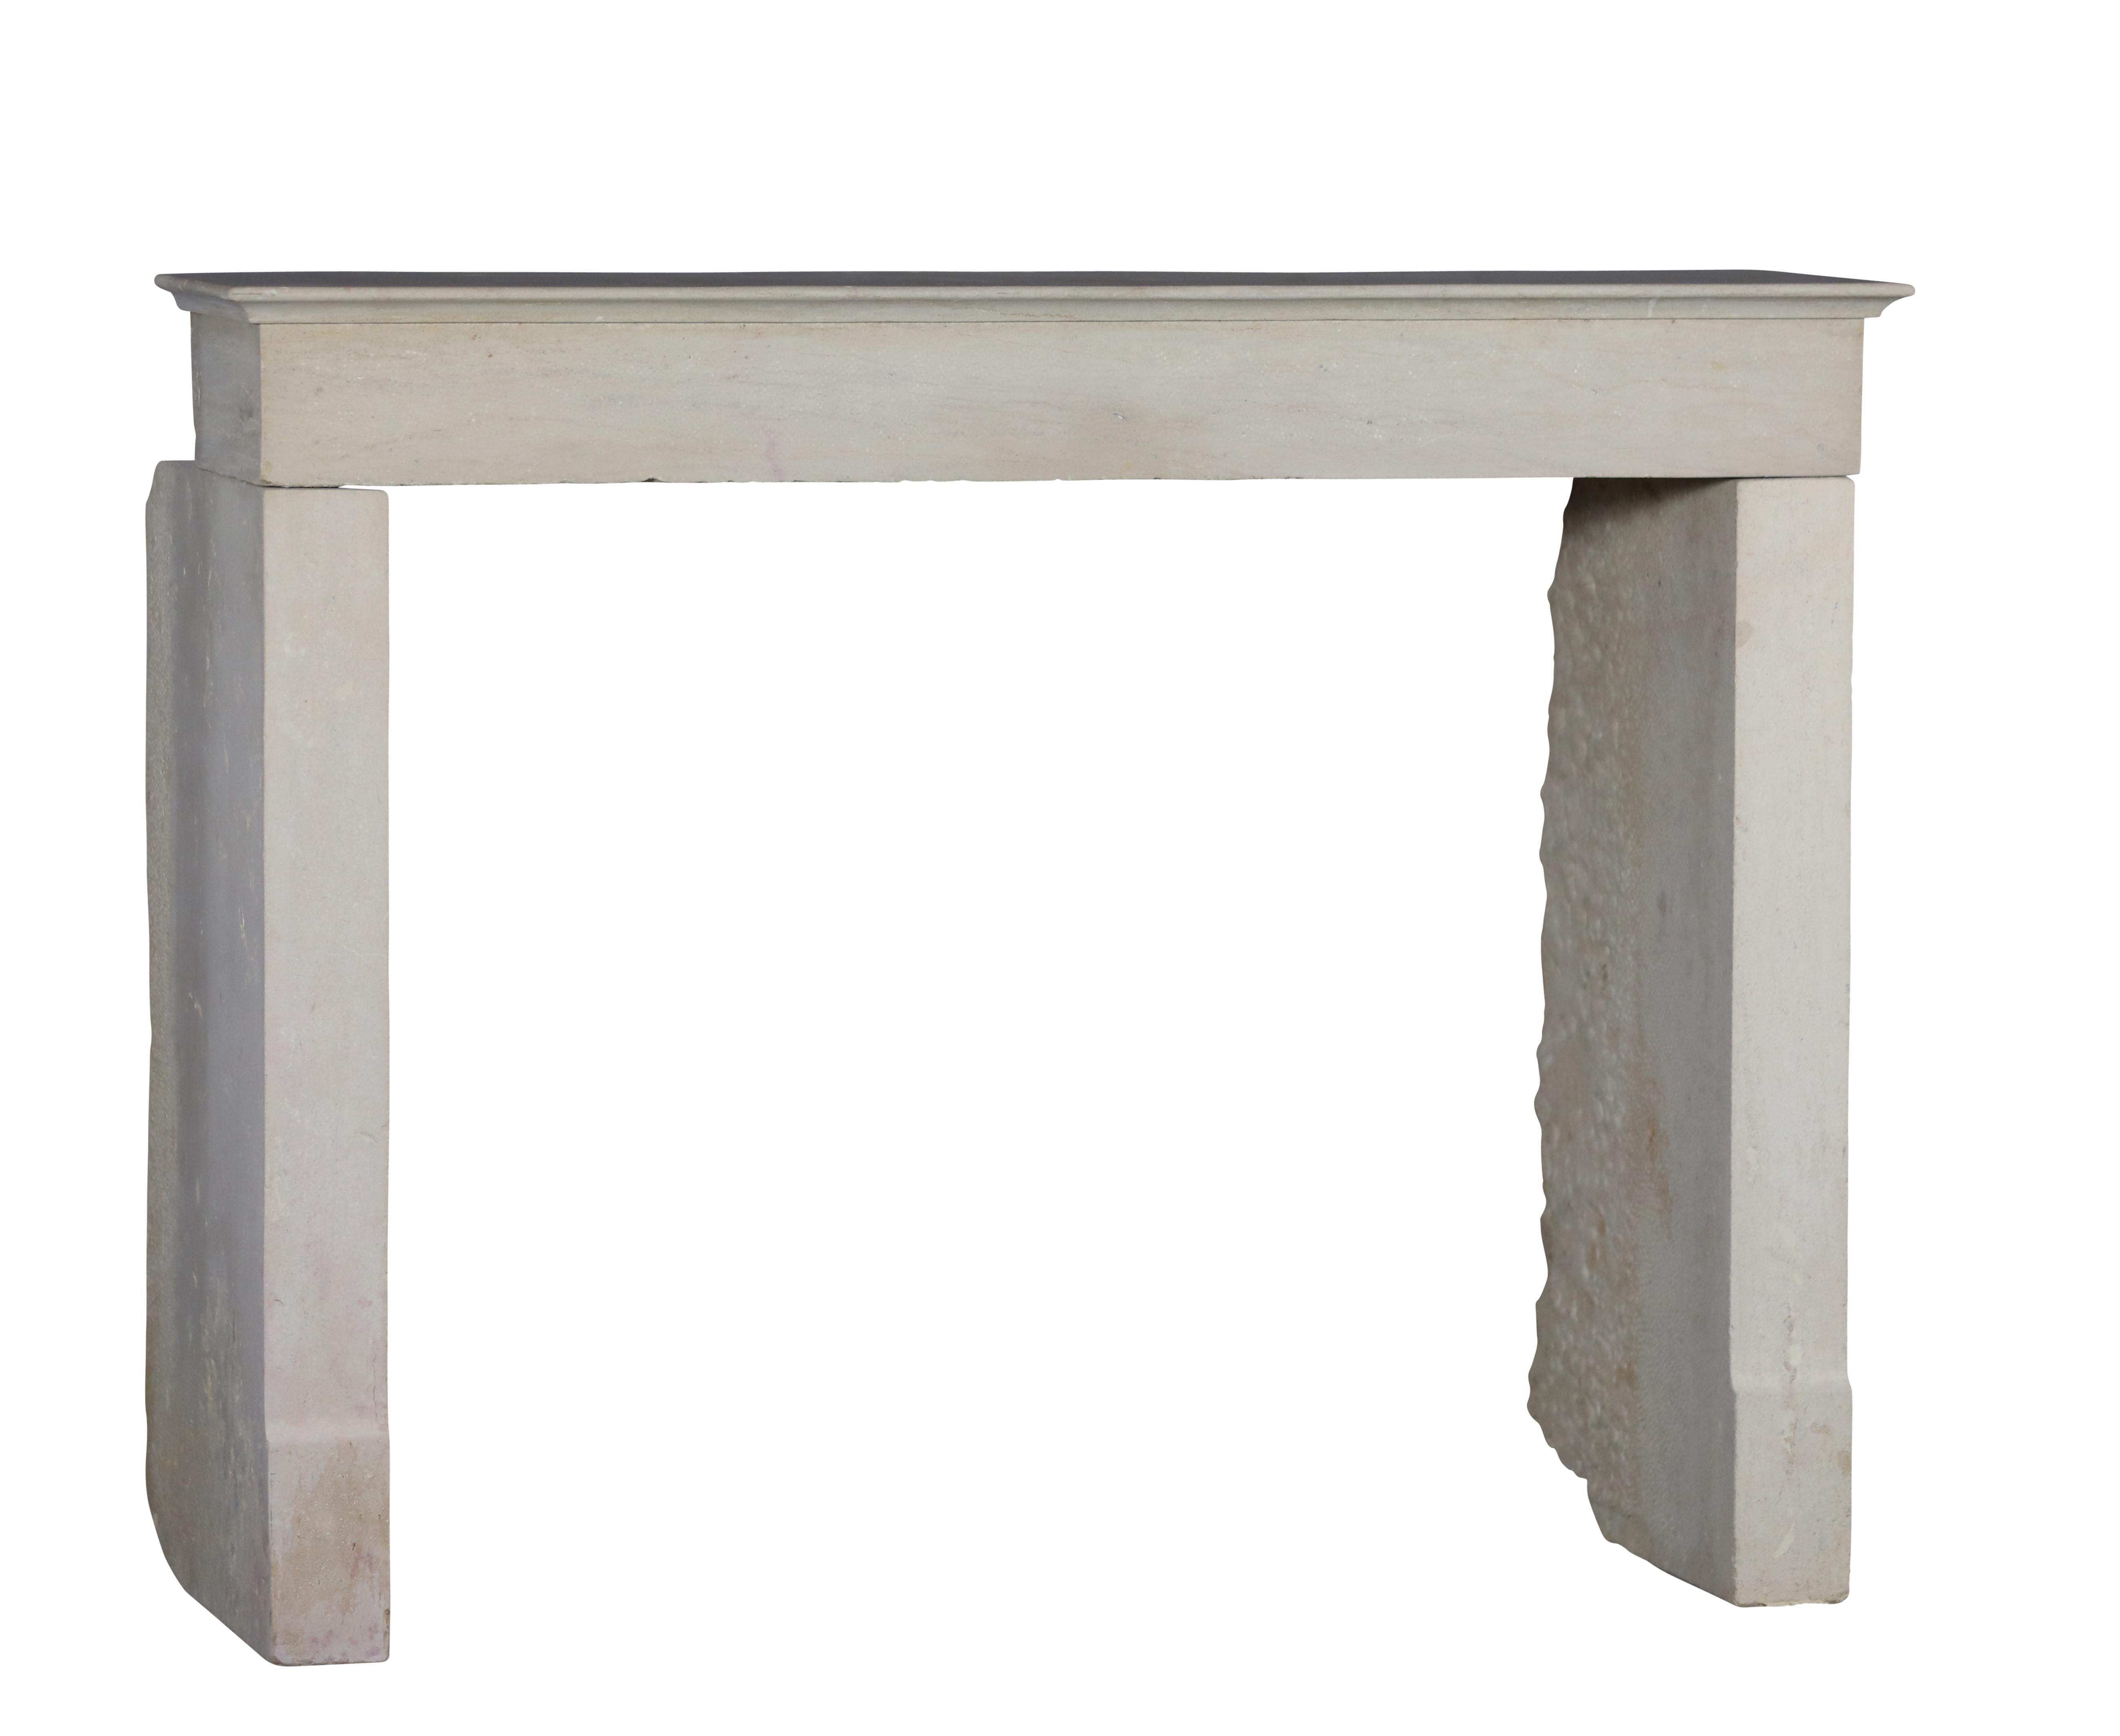 Monochrome beige limestone fireplace surround with straight minimal lining. A perfect fit for a eclectic timeless design. French 19th century period timeless elegancy.
Measurements:
136 cm Exterior Width 53,54 Inch
106,5 cm Exterior Height 41,93